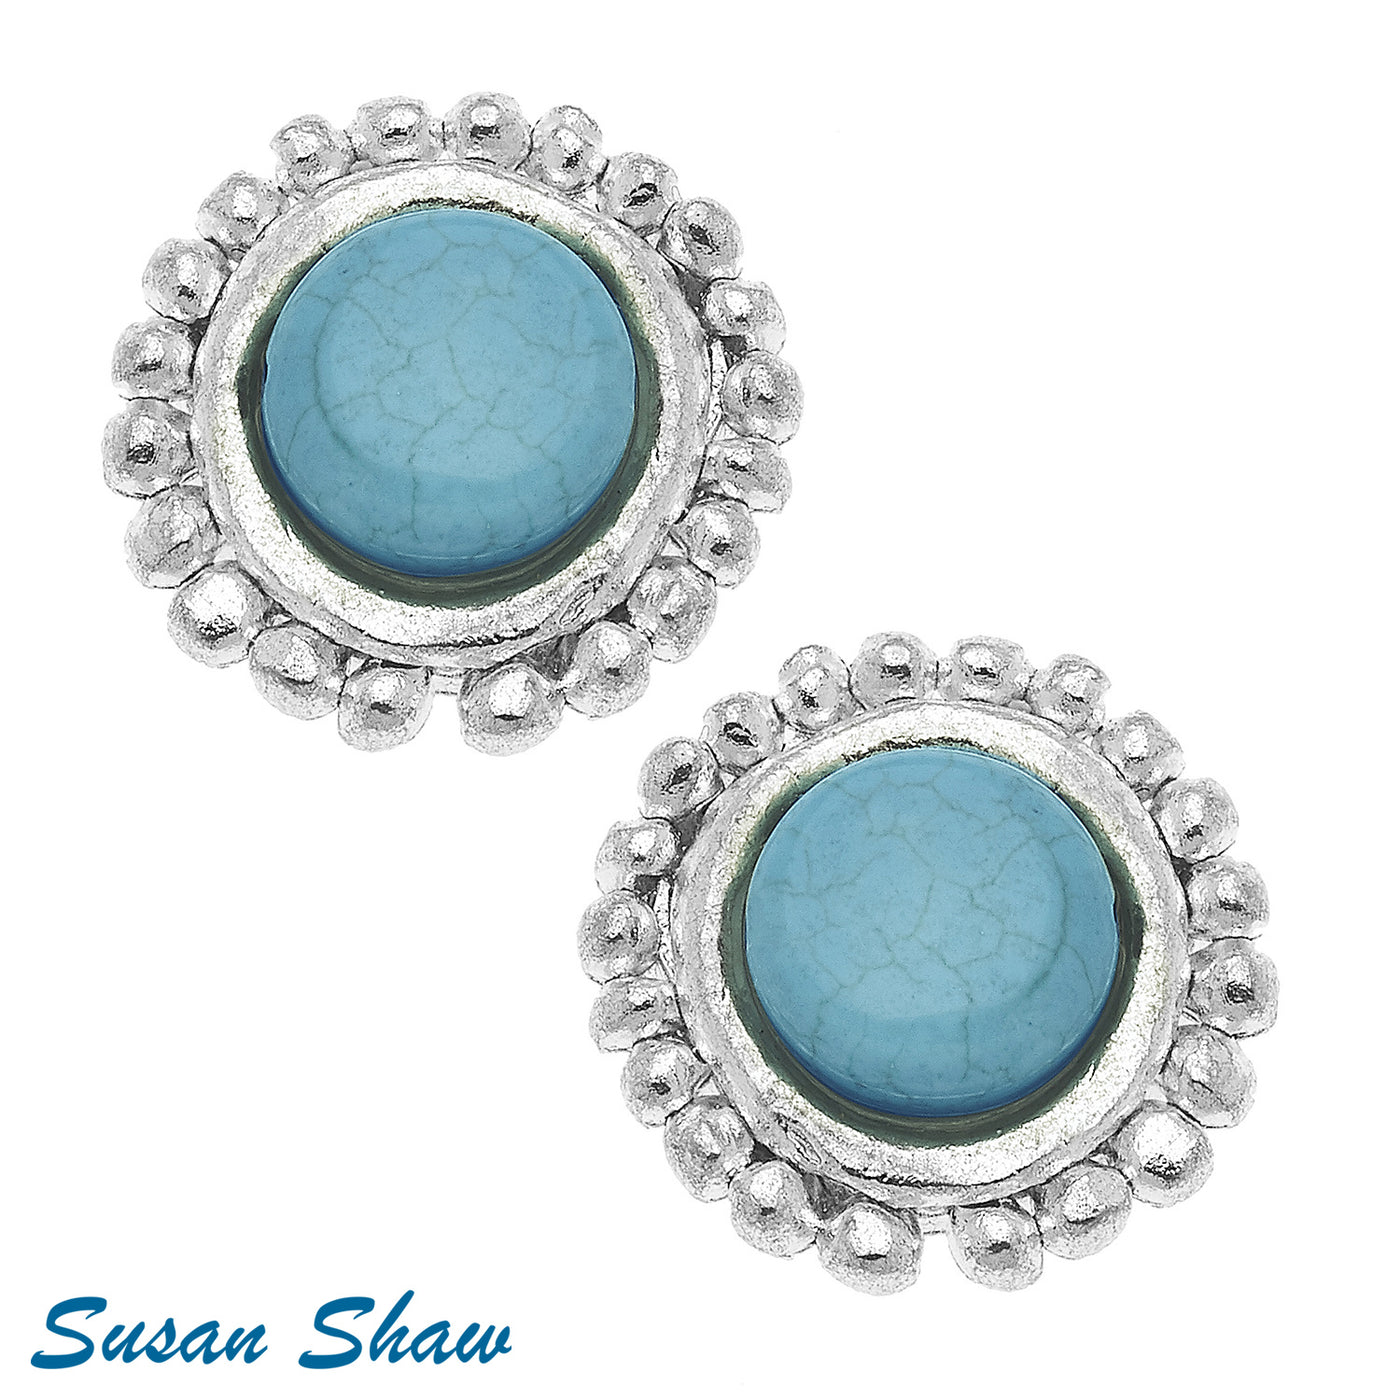 Silver with Genuine Turquoise Pierced Earrings - Susan Shaw